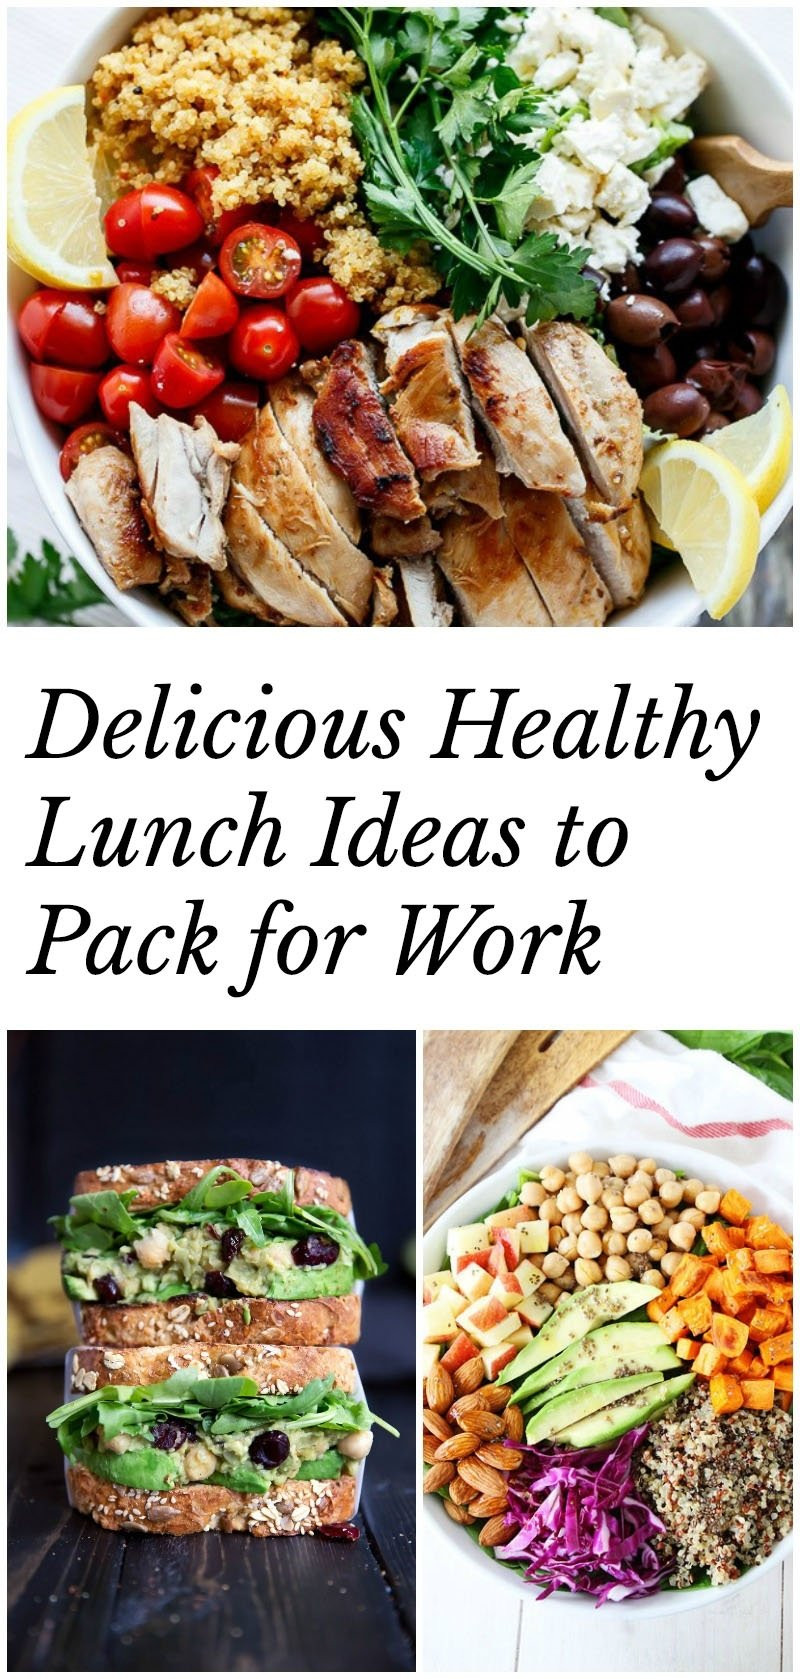 Simple Healthy Lunches
 10 Best Easy Healthy Lunch Ideas Work 2019